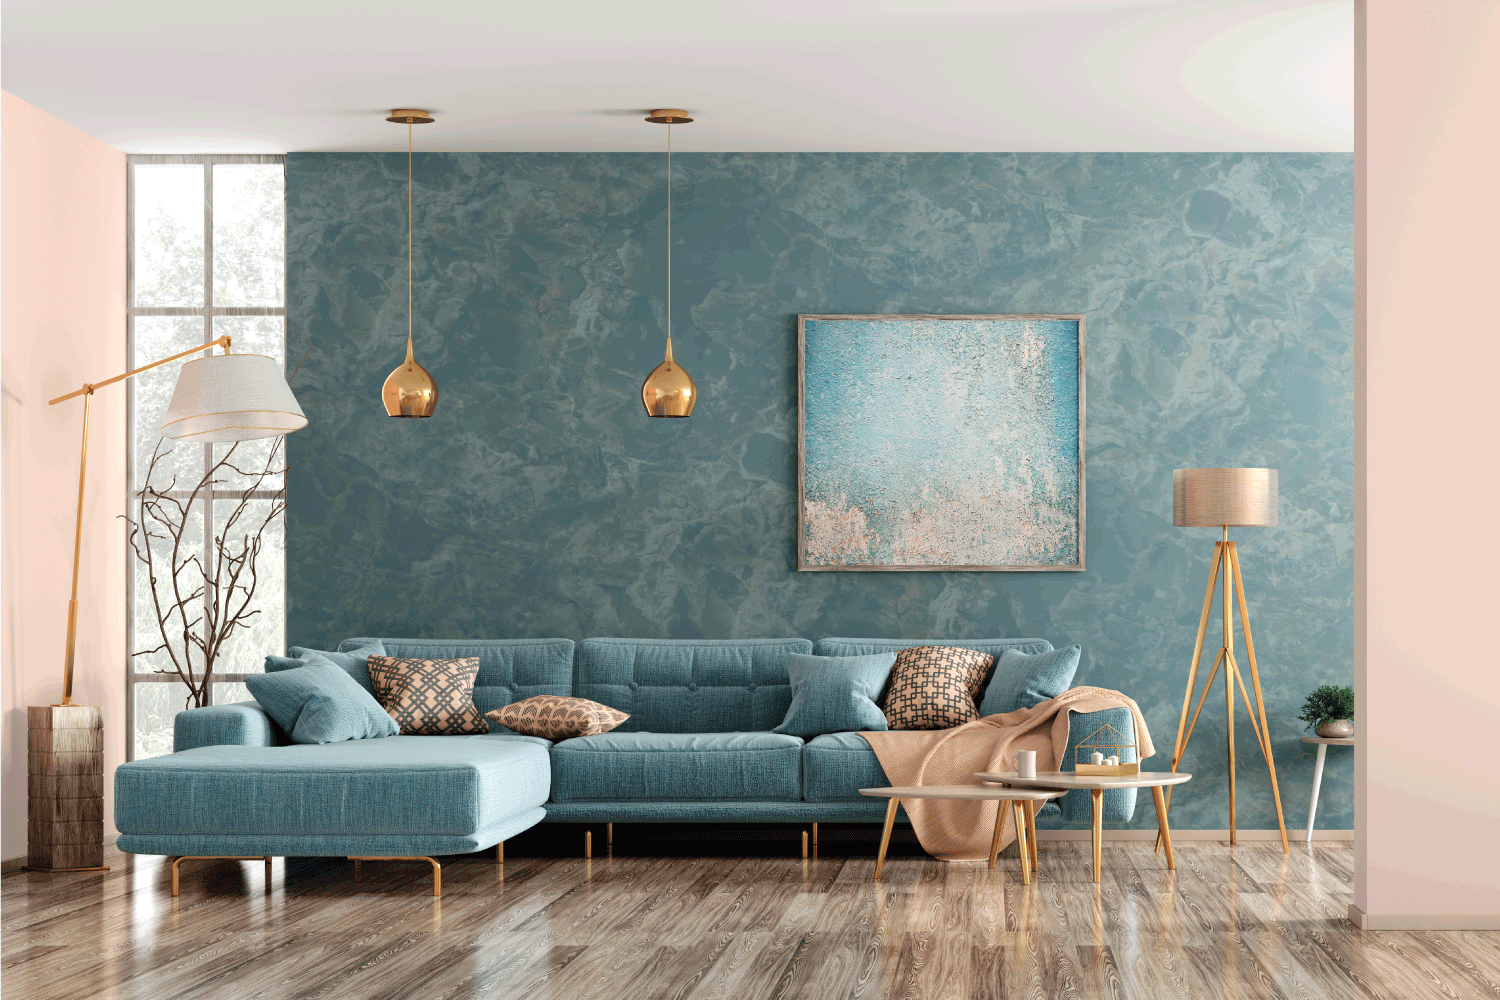 Modern interior of living room with blue corner sofa, coffee tables, floor lamp